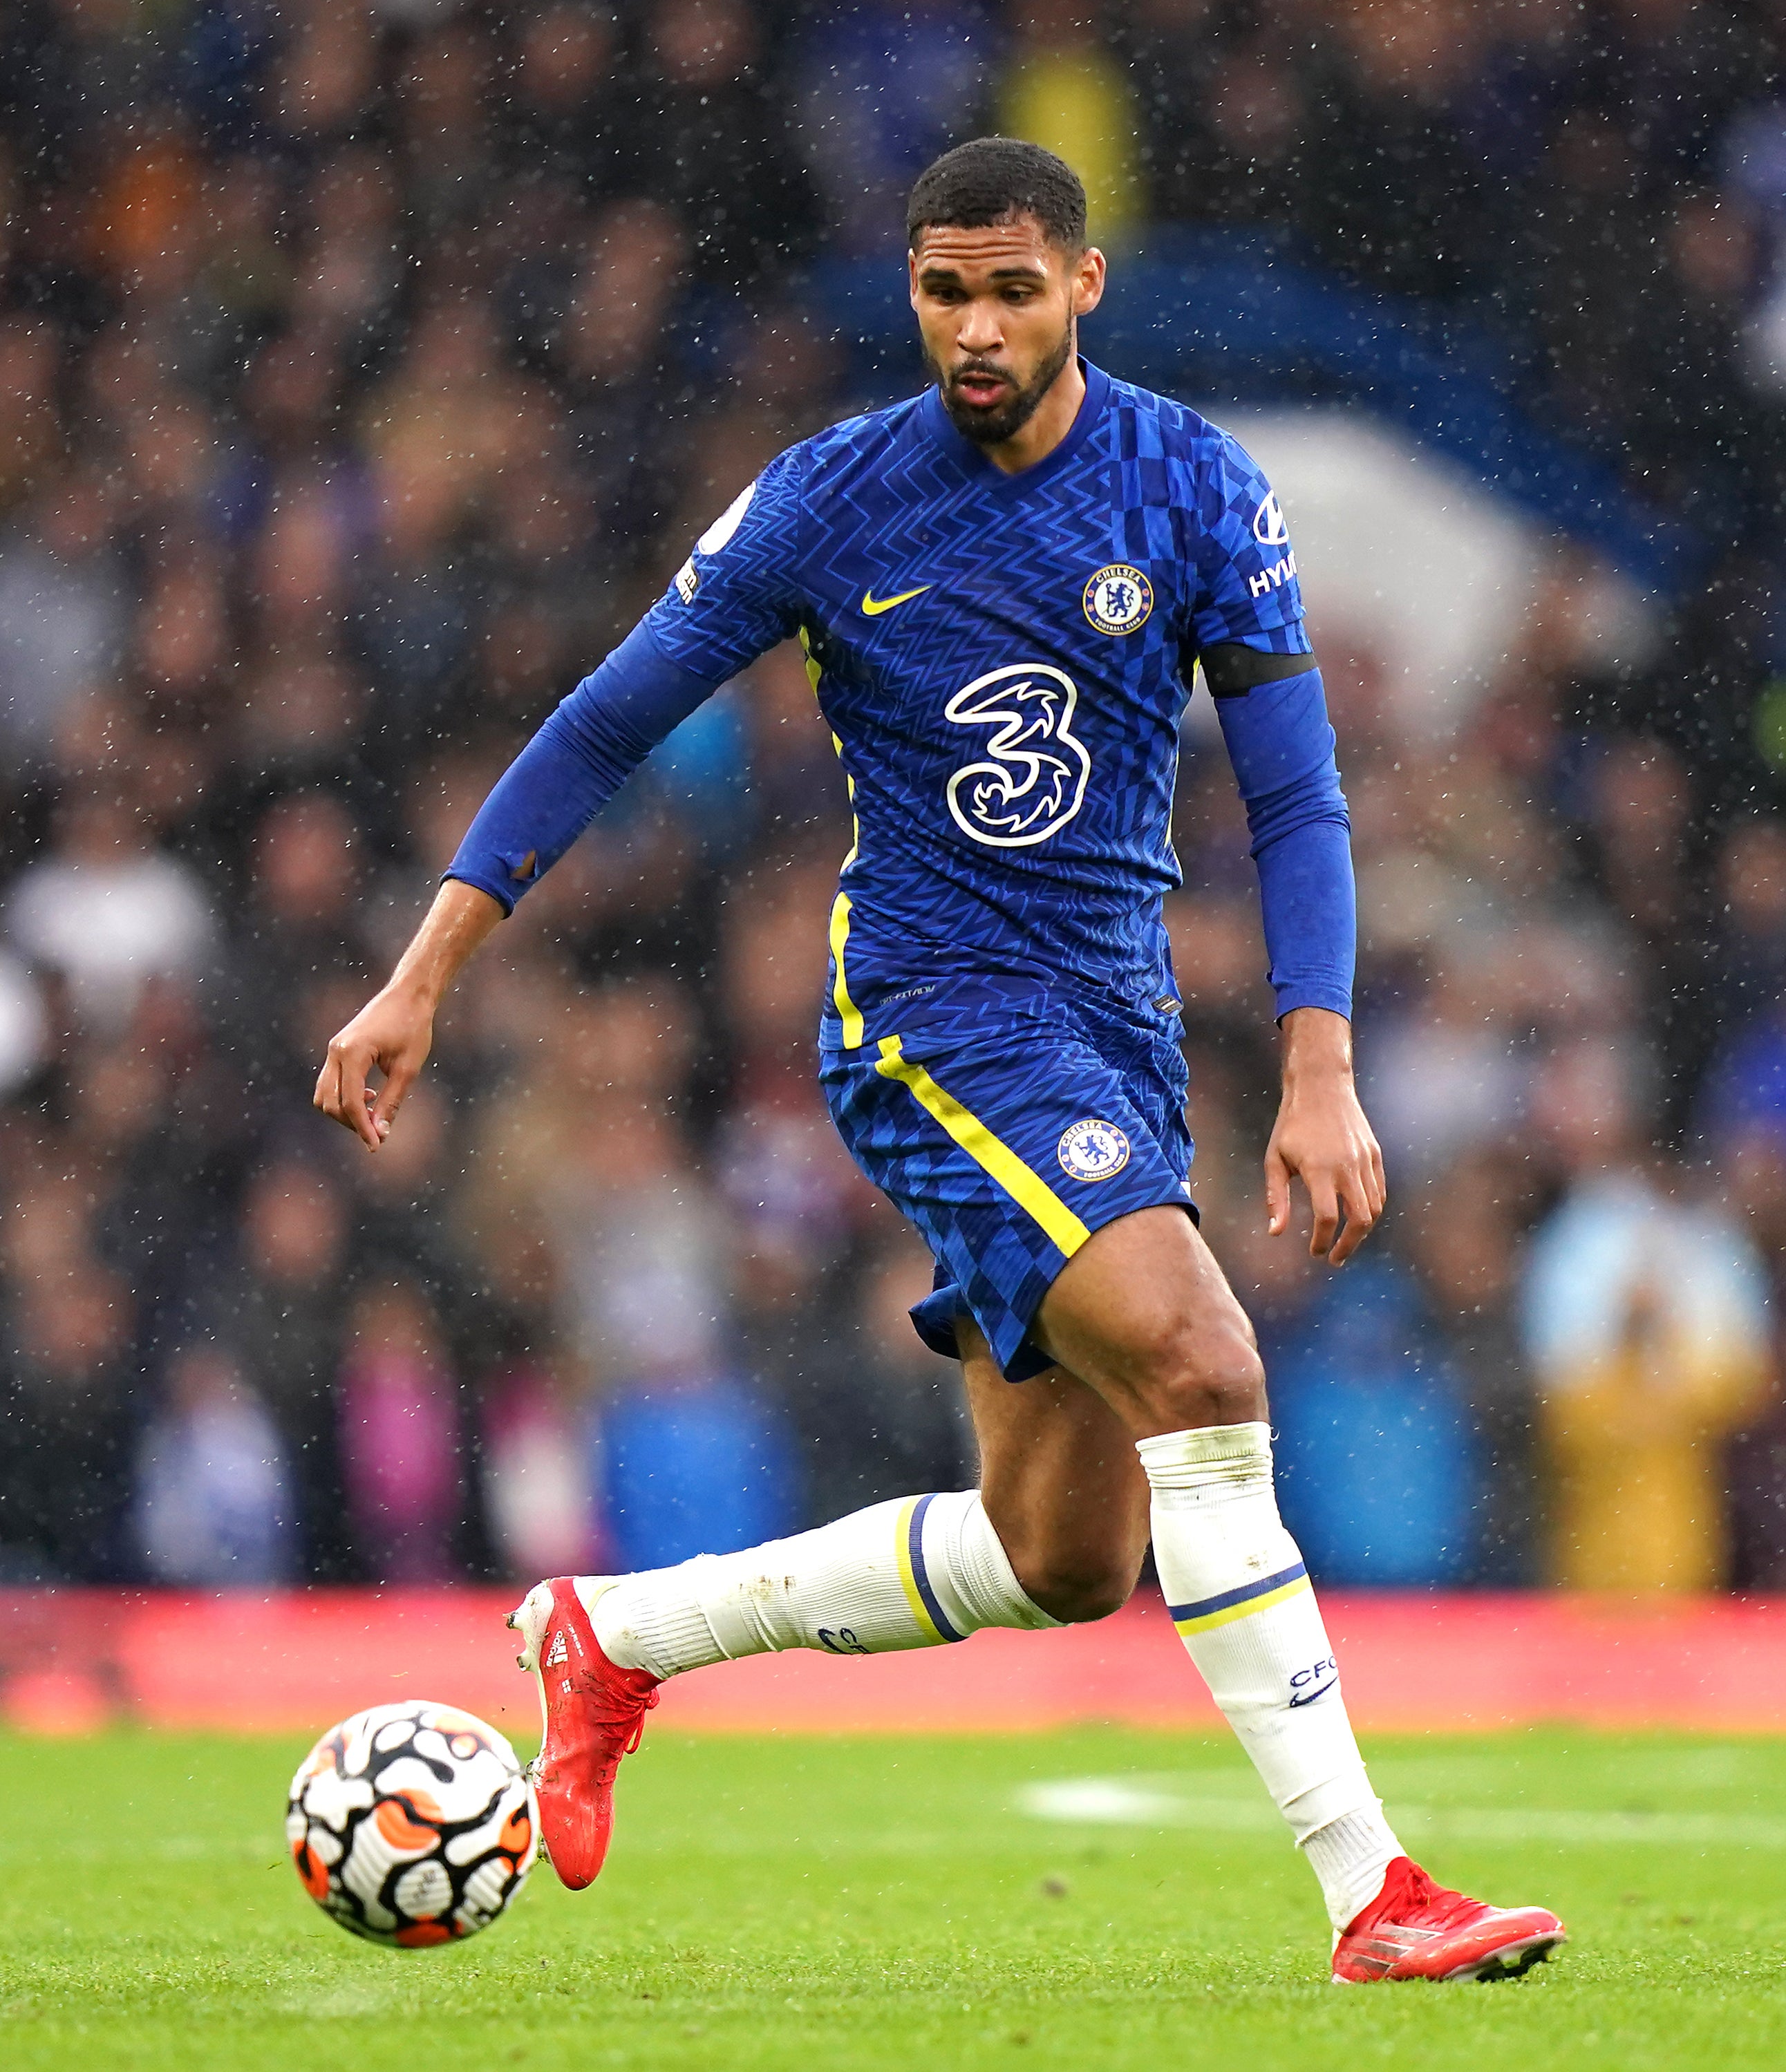 Ruben Loftus-Cheek, pictured, has been back to his best with Chelsea (Tess Derry/PA)